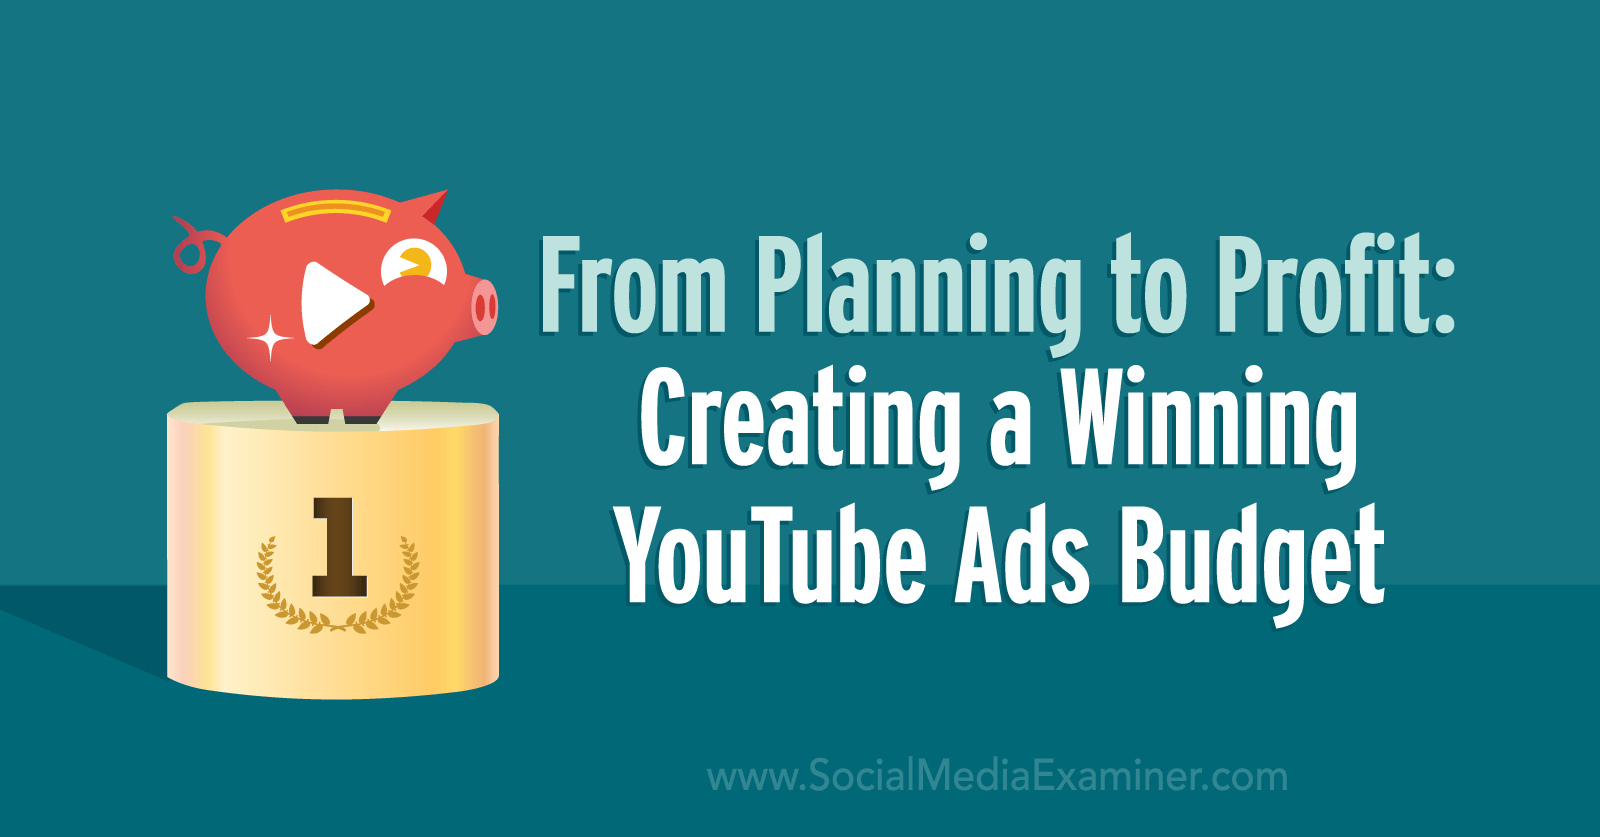 From Planning to Profit: Creating a Winning YouTube Ads Budget by Social Media Examiner